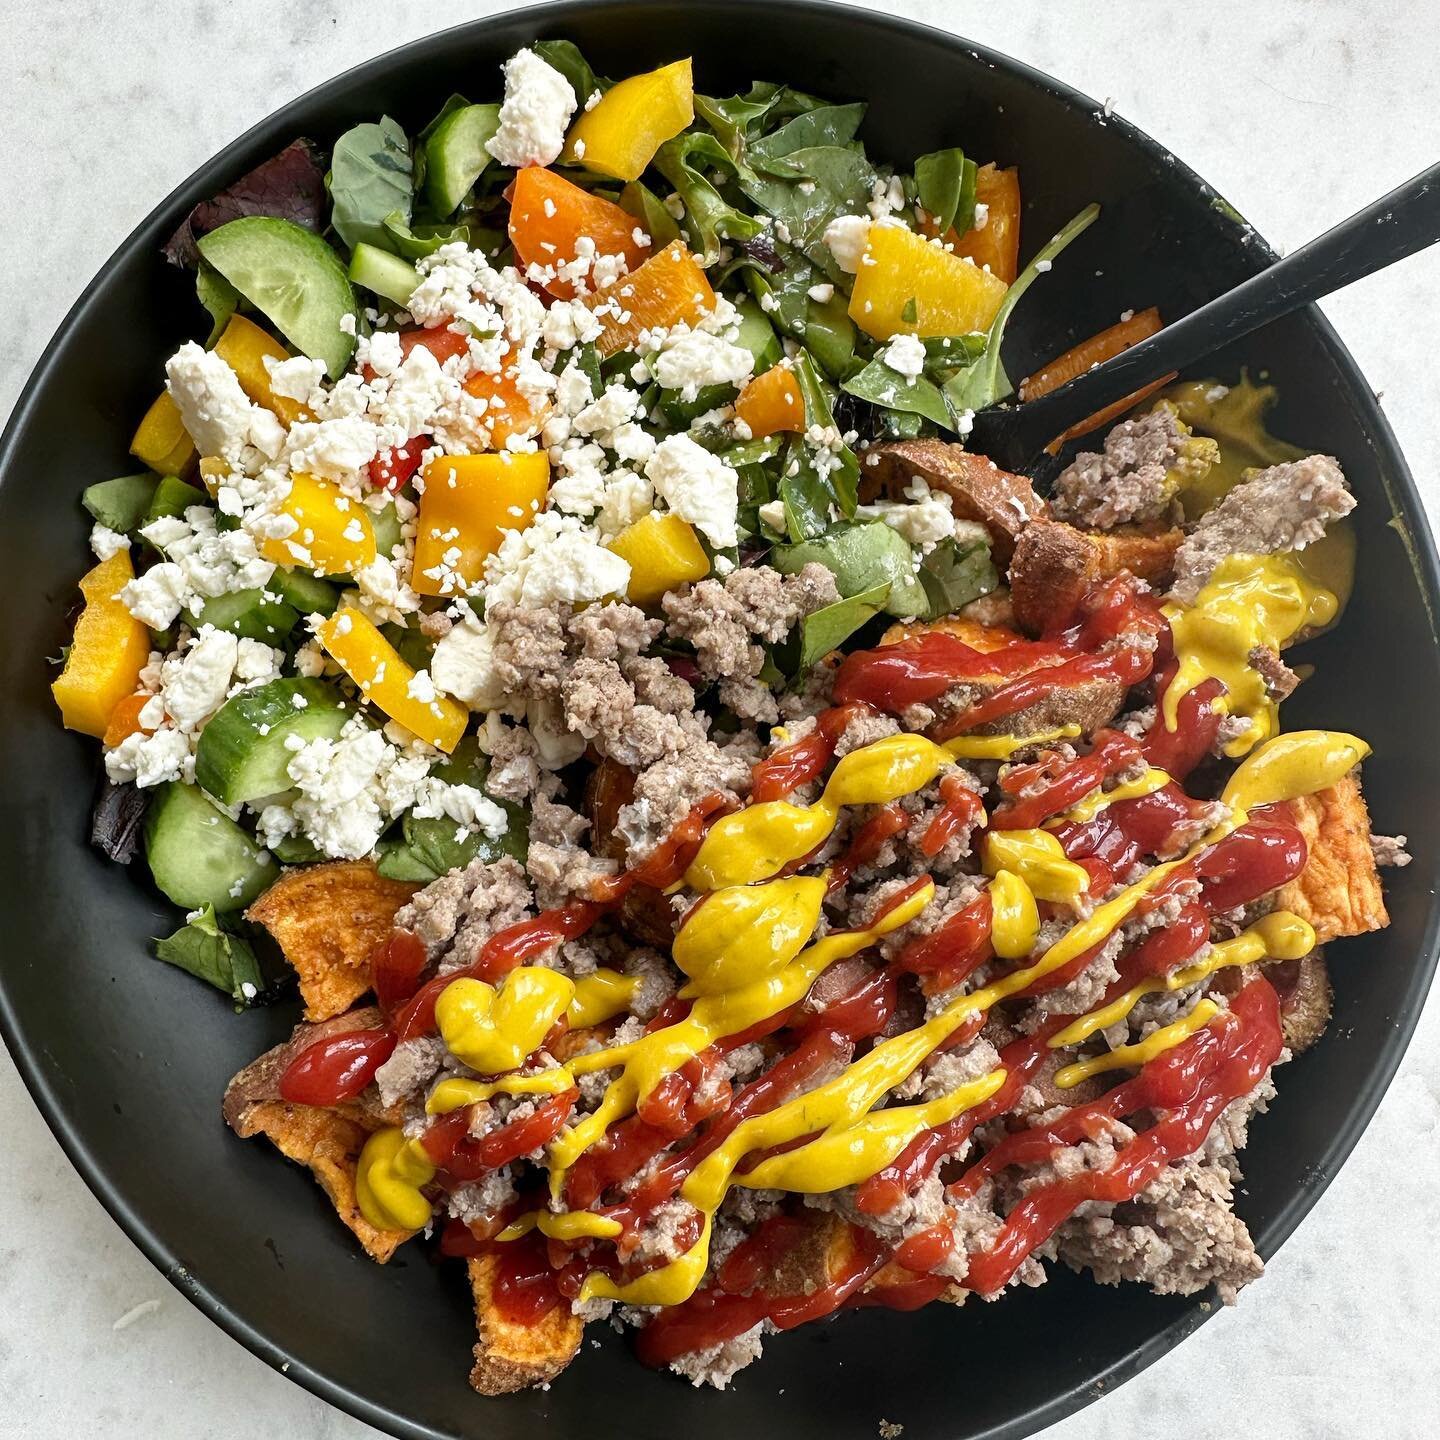 Lunch this week! 

Easy meal prep burger bowl with sexy little side salad-

Brown your ground beef, bake some sweet potatoes, cut up some fresh veggies to throw over some spring mix, top with feta and maple balsamic dressing. 

Oh and don&rsquo;t for